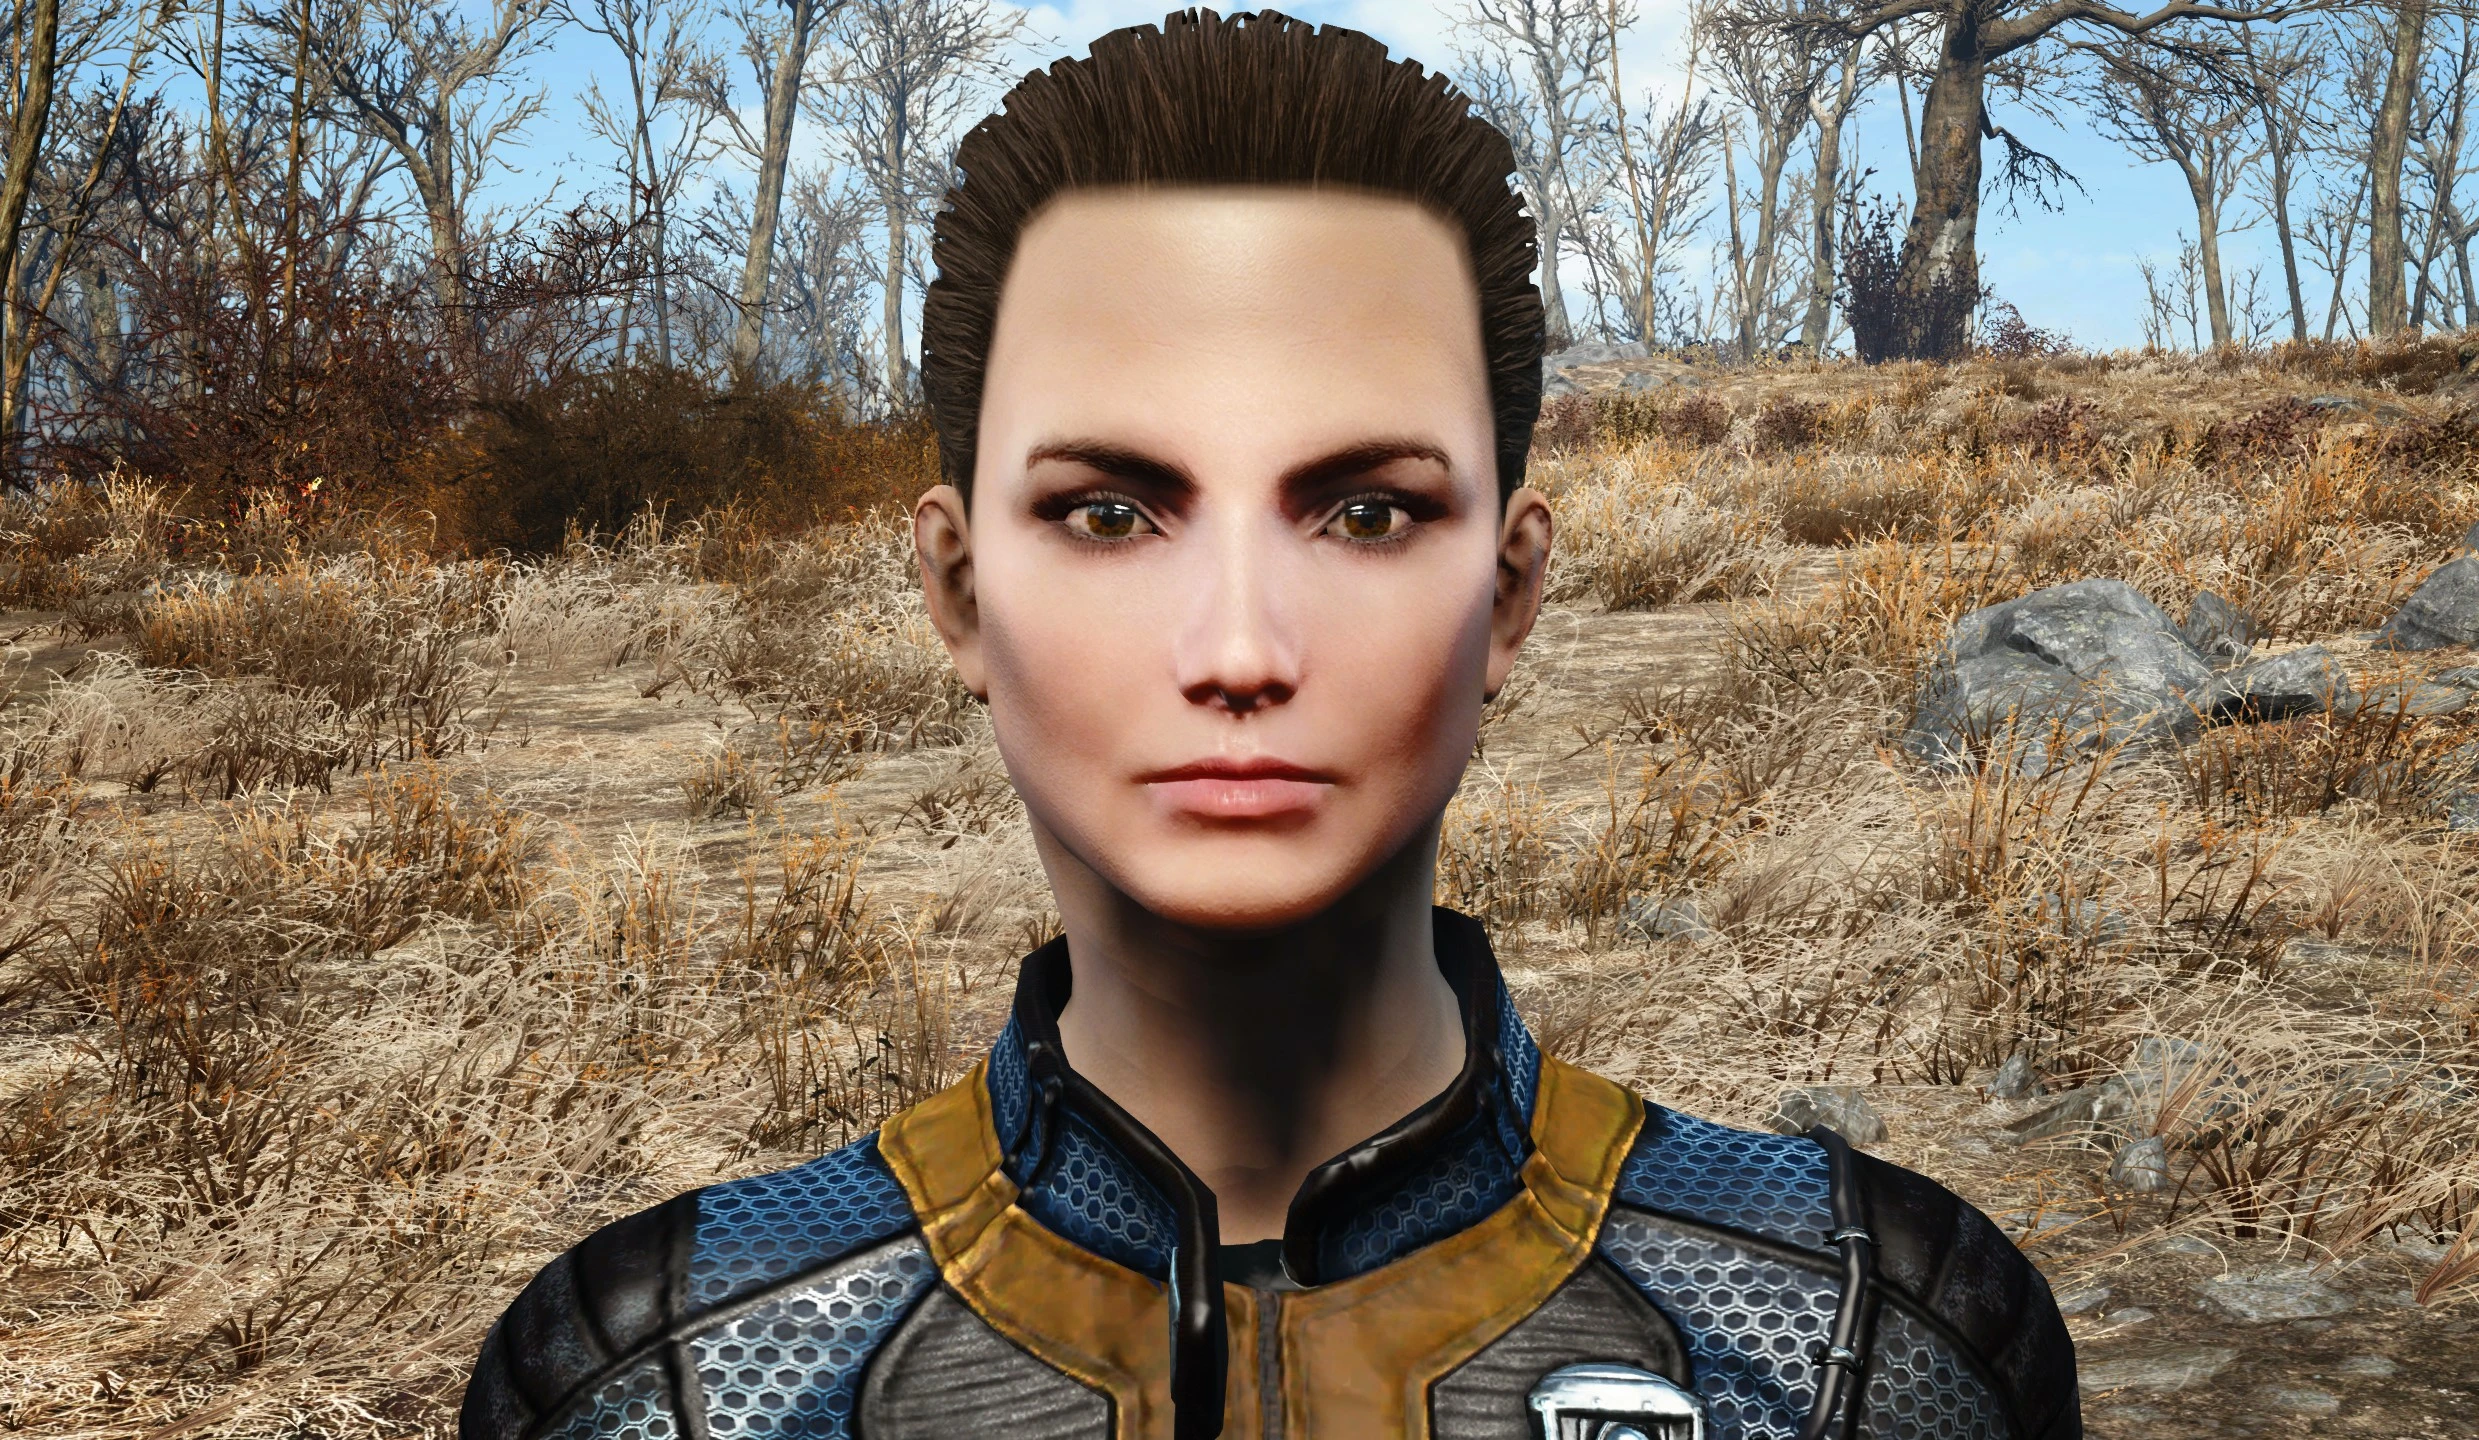 star wars fallout 4 mods